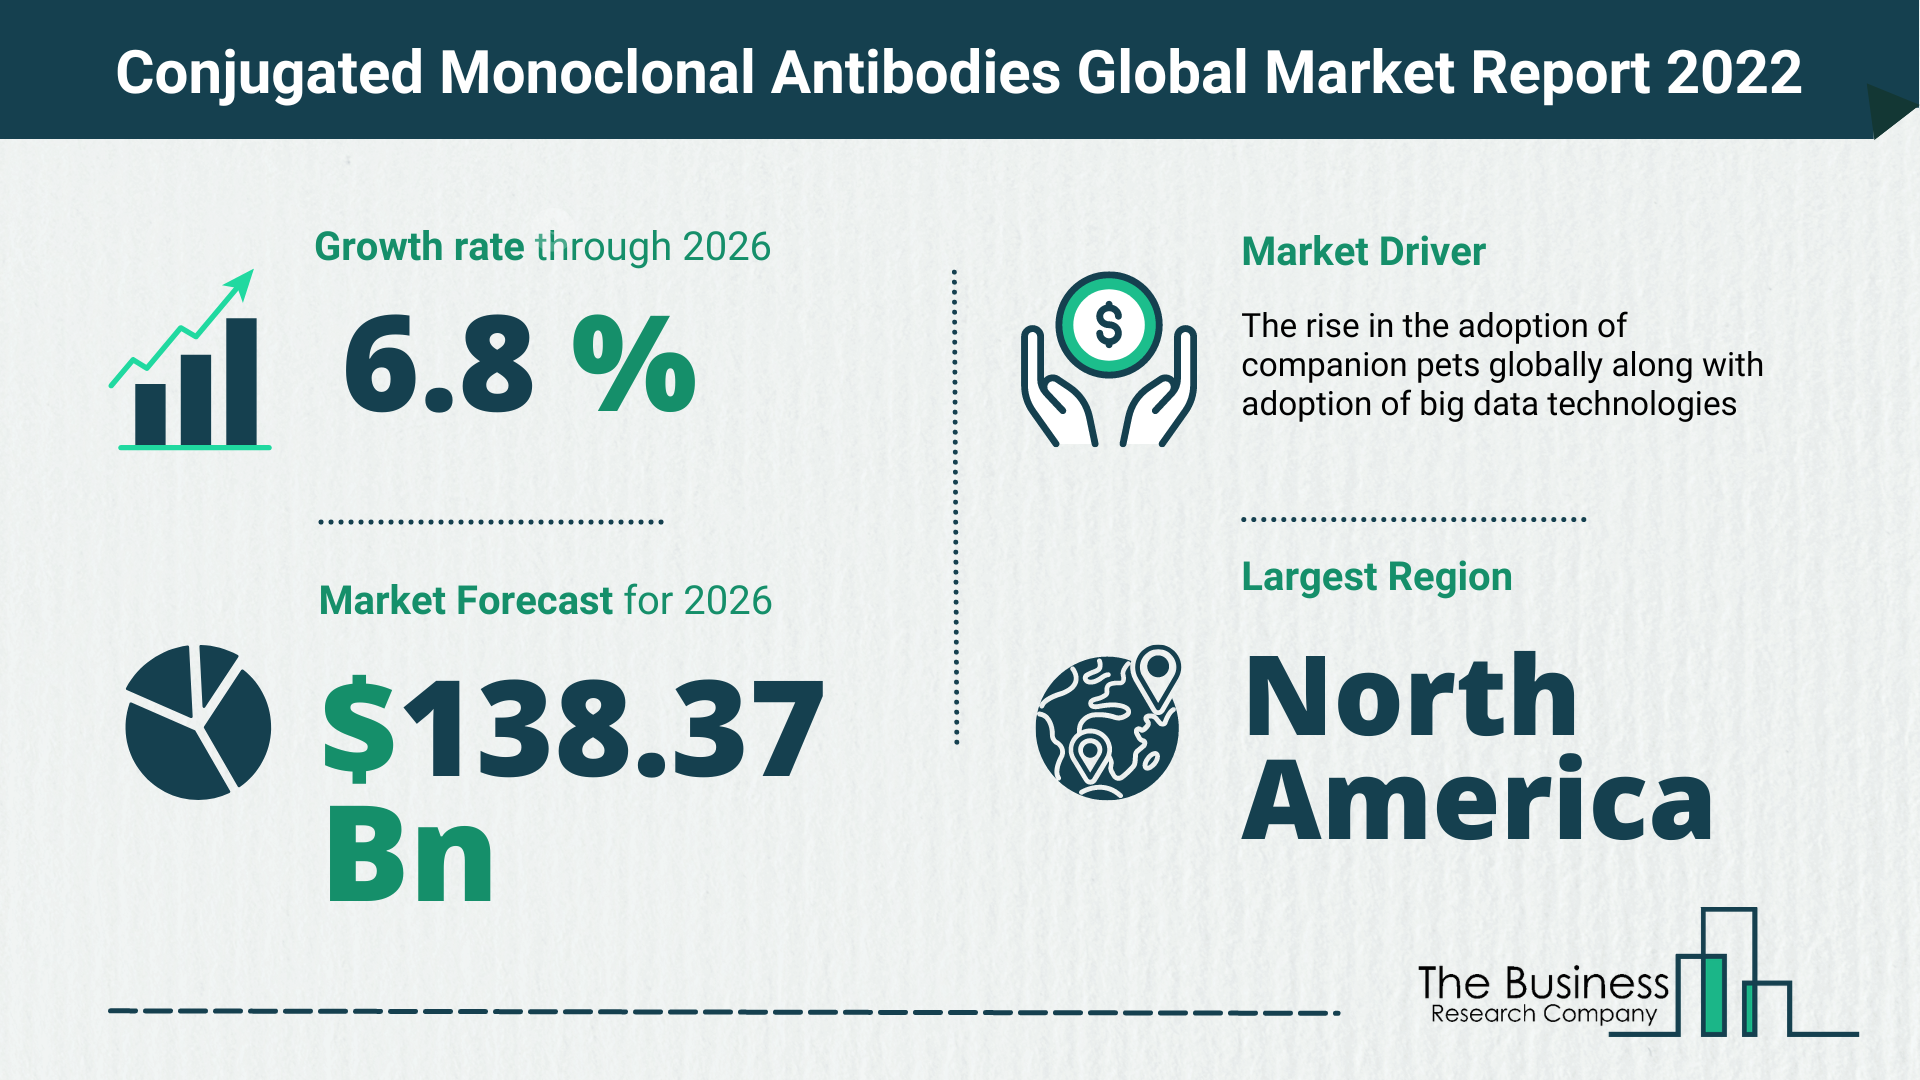 Global Conjugated Monoclonal Antibodies Market 2022 – Market Opportunities And Strategies